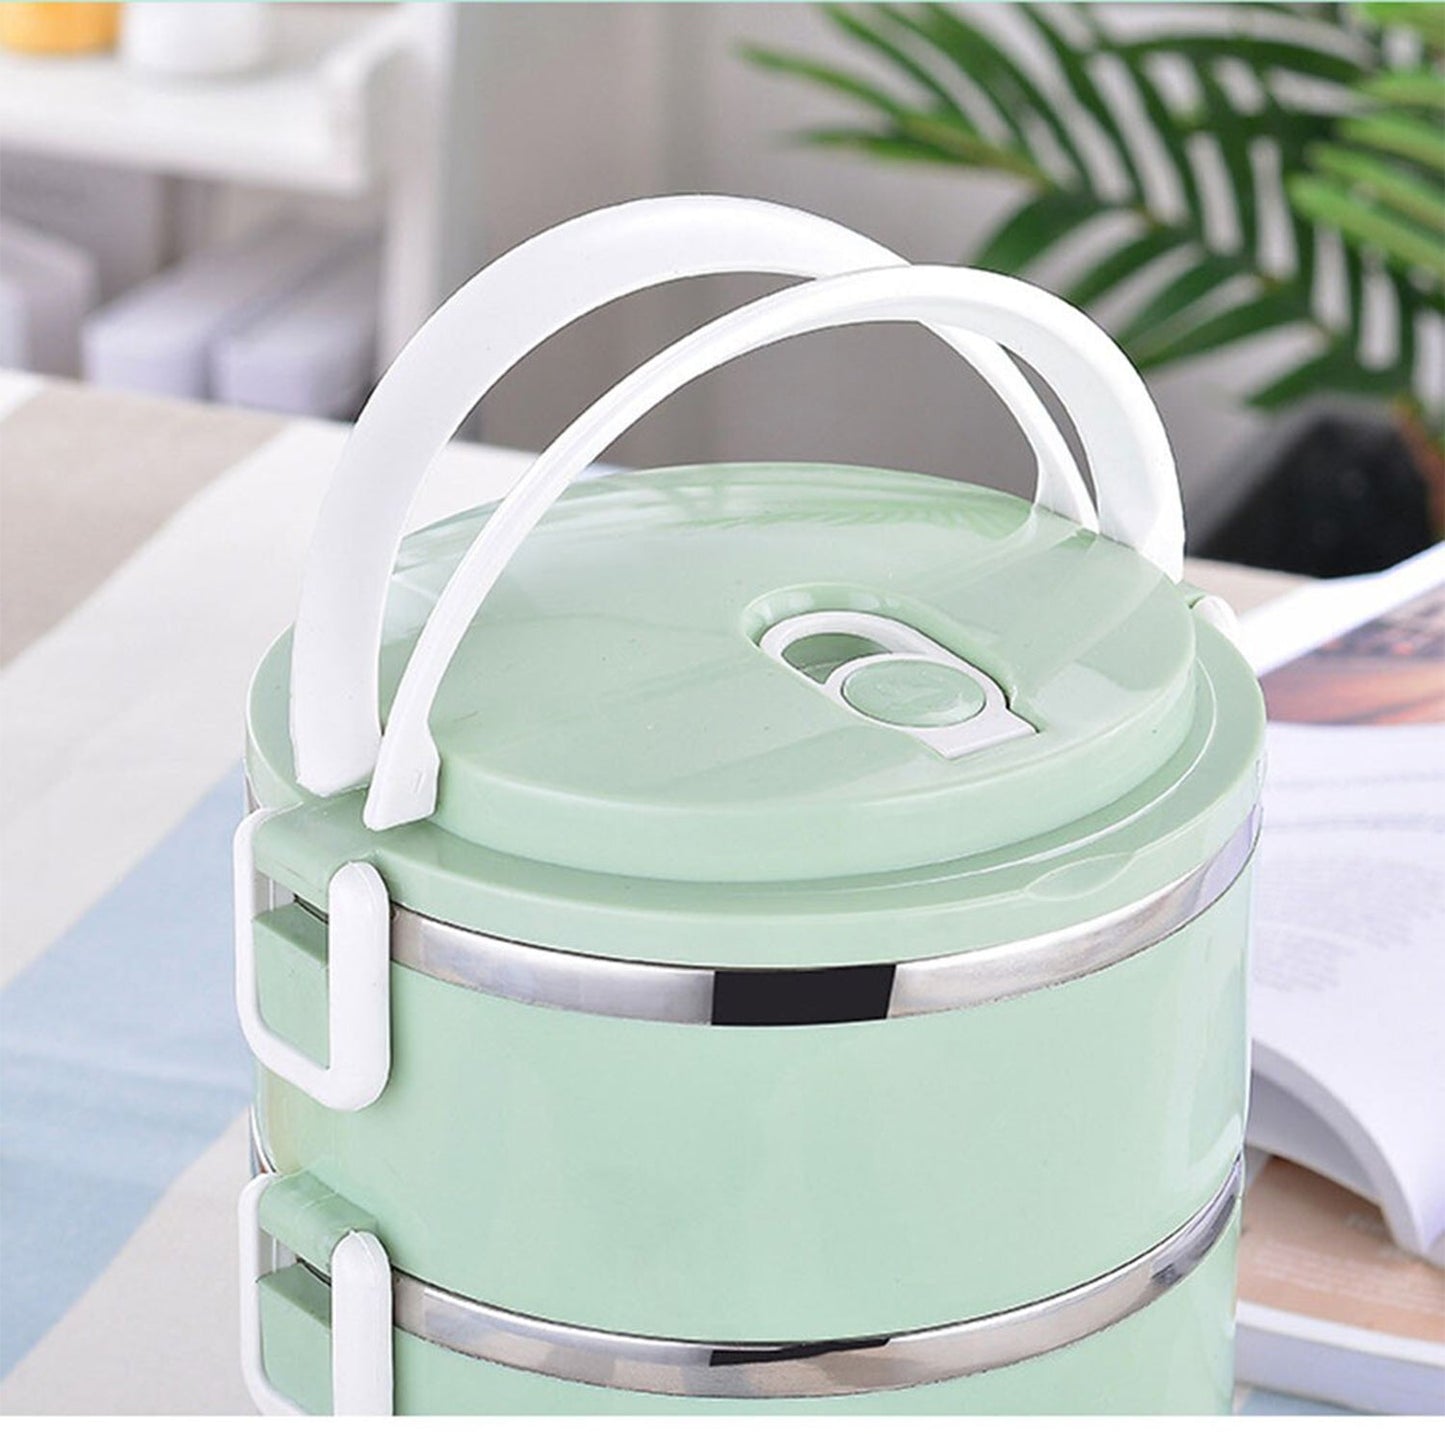 Multi Layer Stainless Steel Hot Lunch Box (3 Layer)